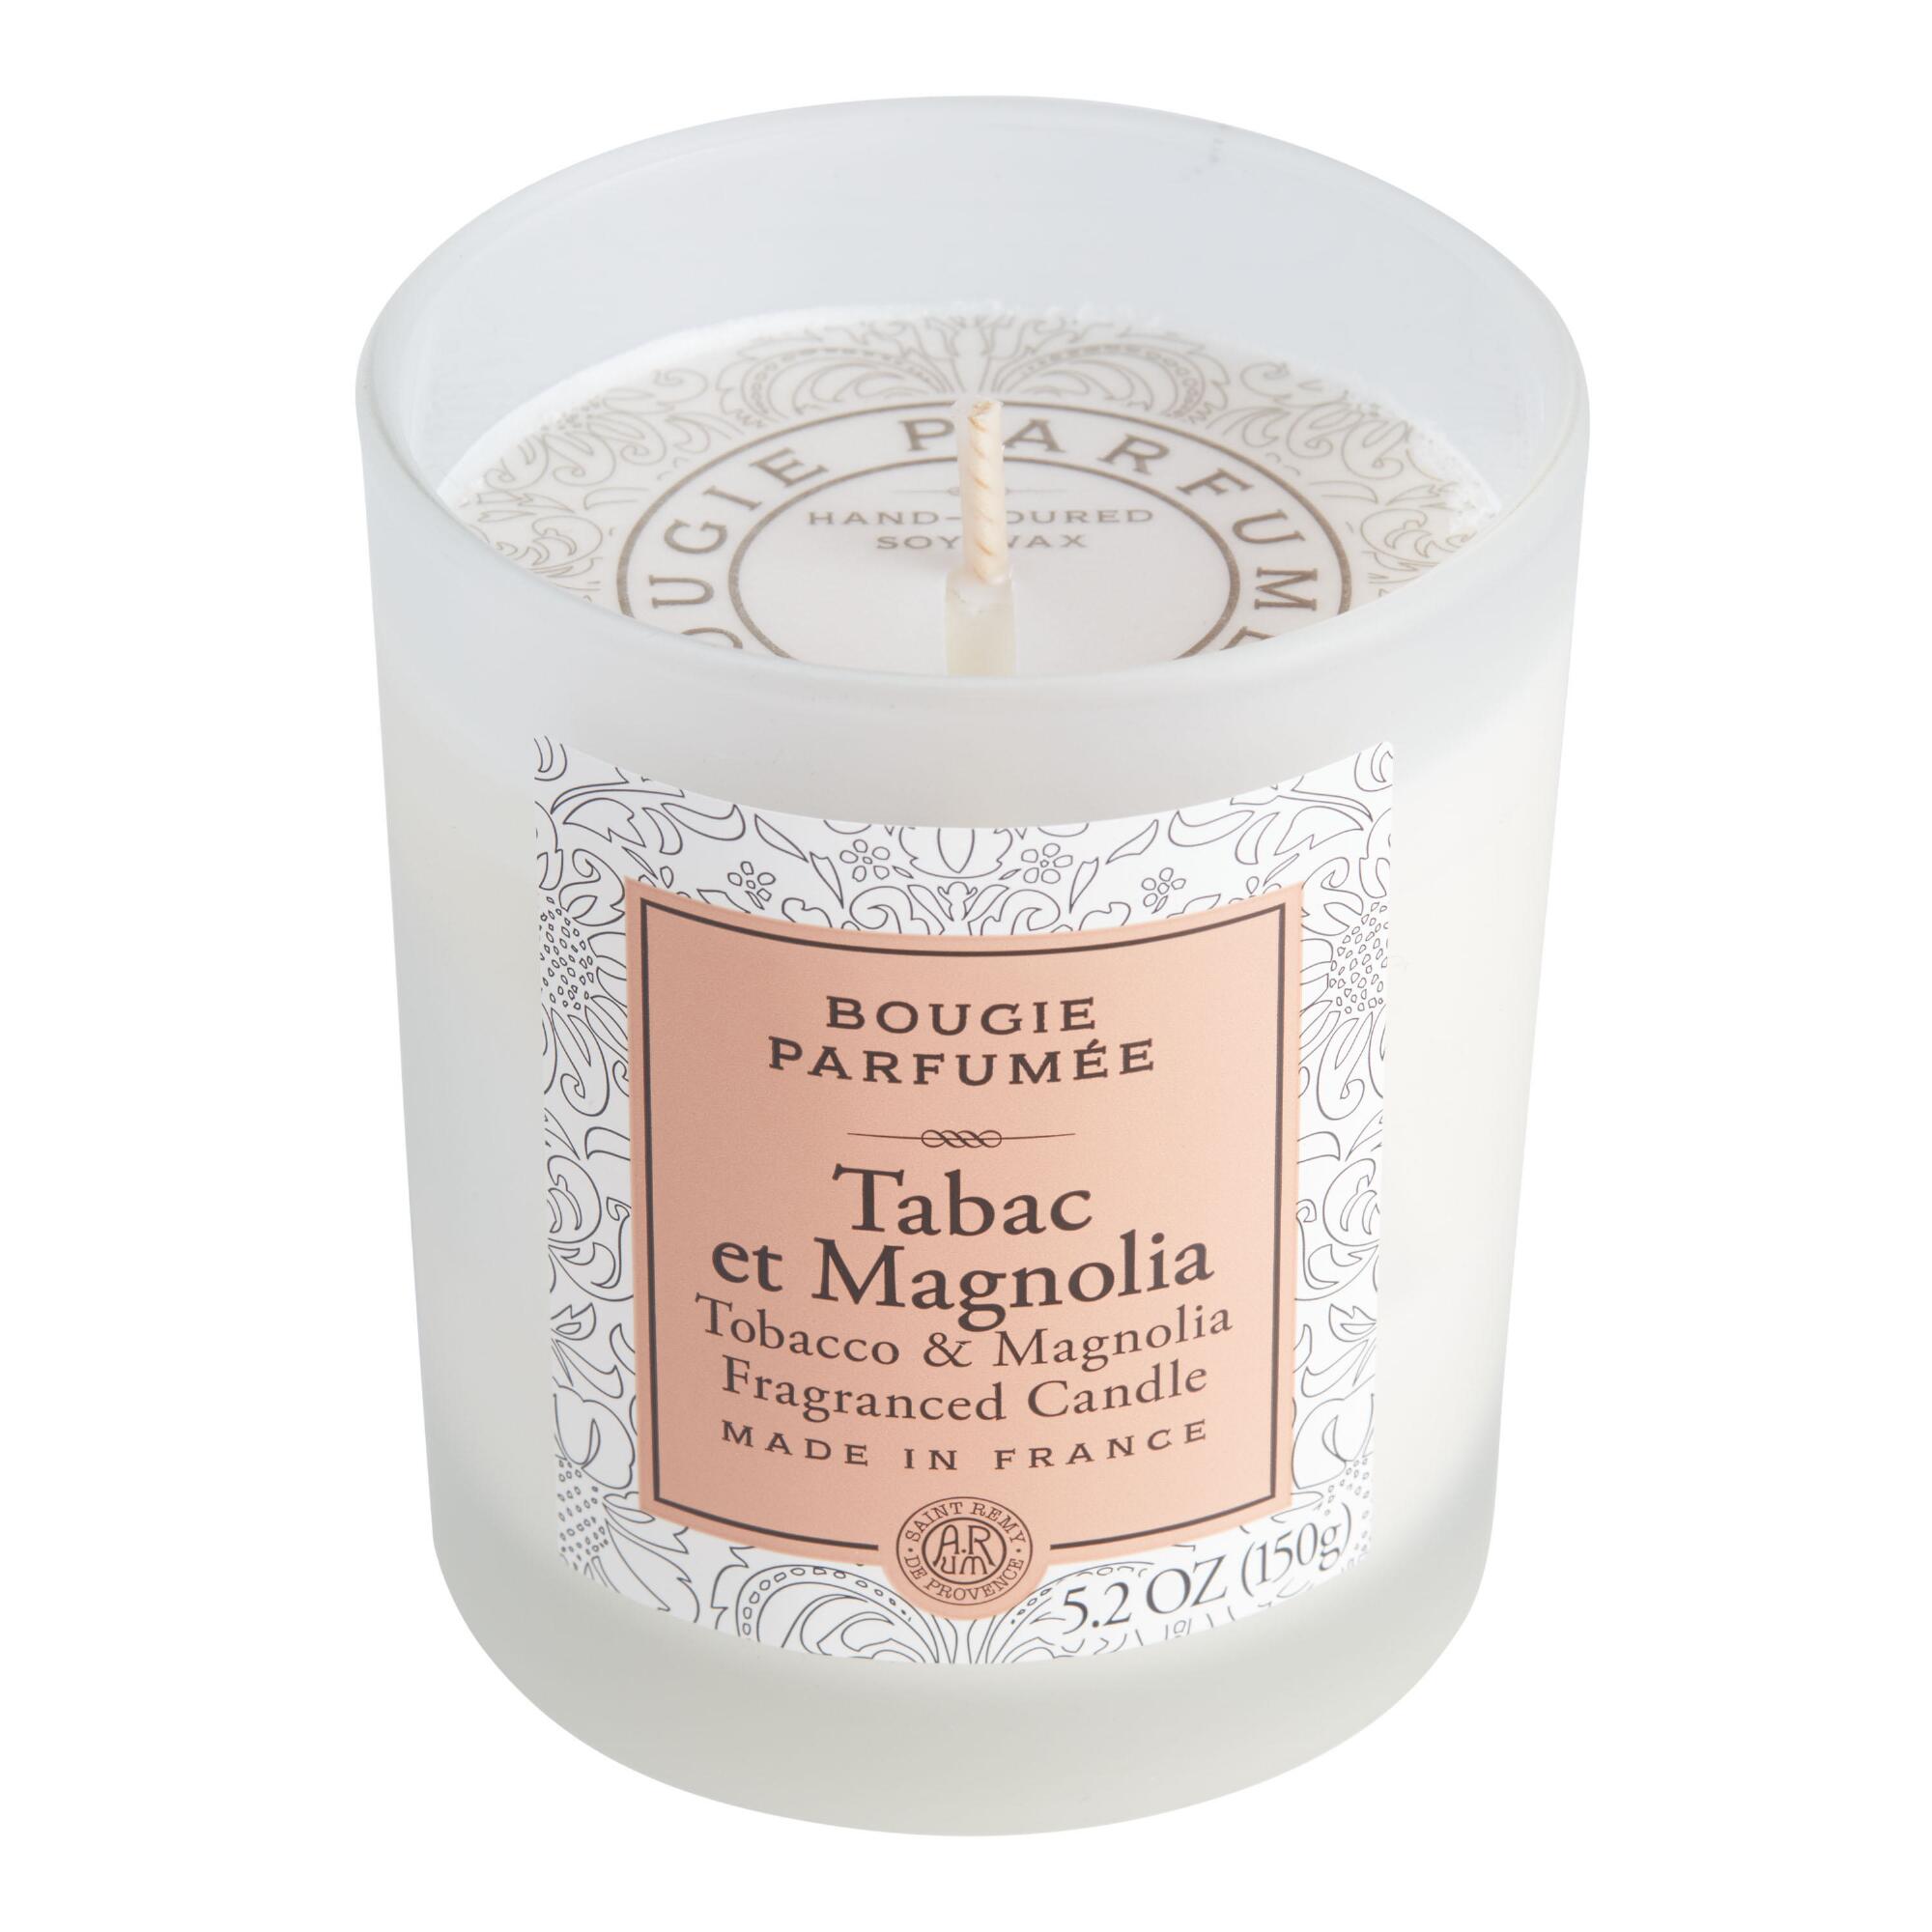 Tobacco & Magnolia Bougie Parfumee Scented Candle by World Market